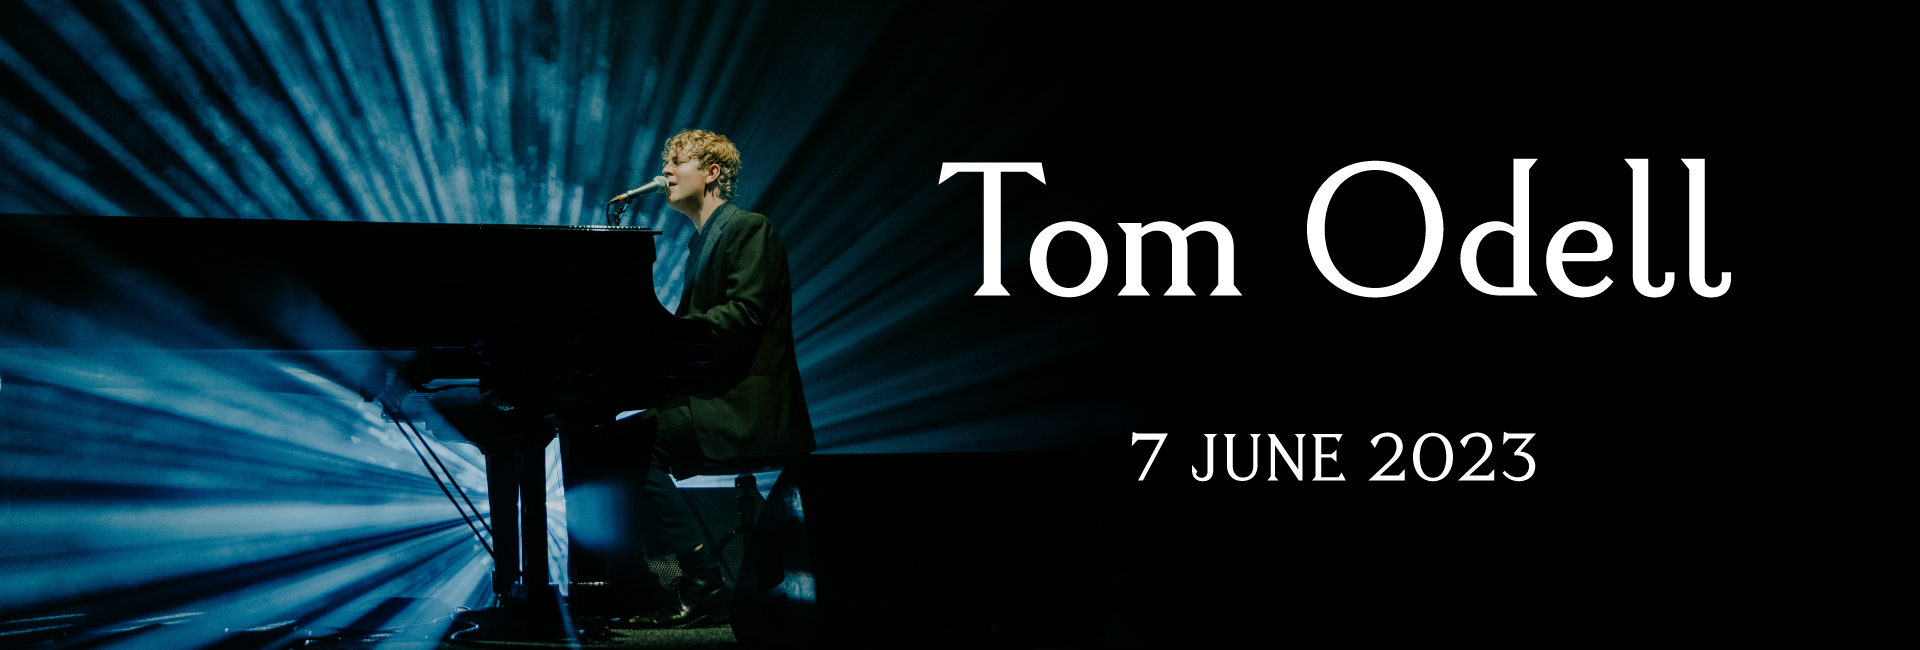 Tom Odell to perform Live at Dubai Opera